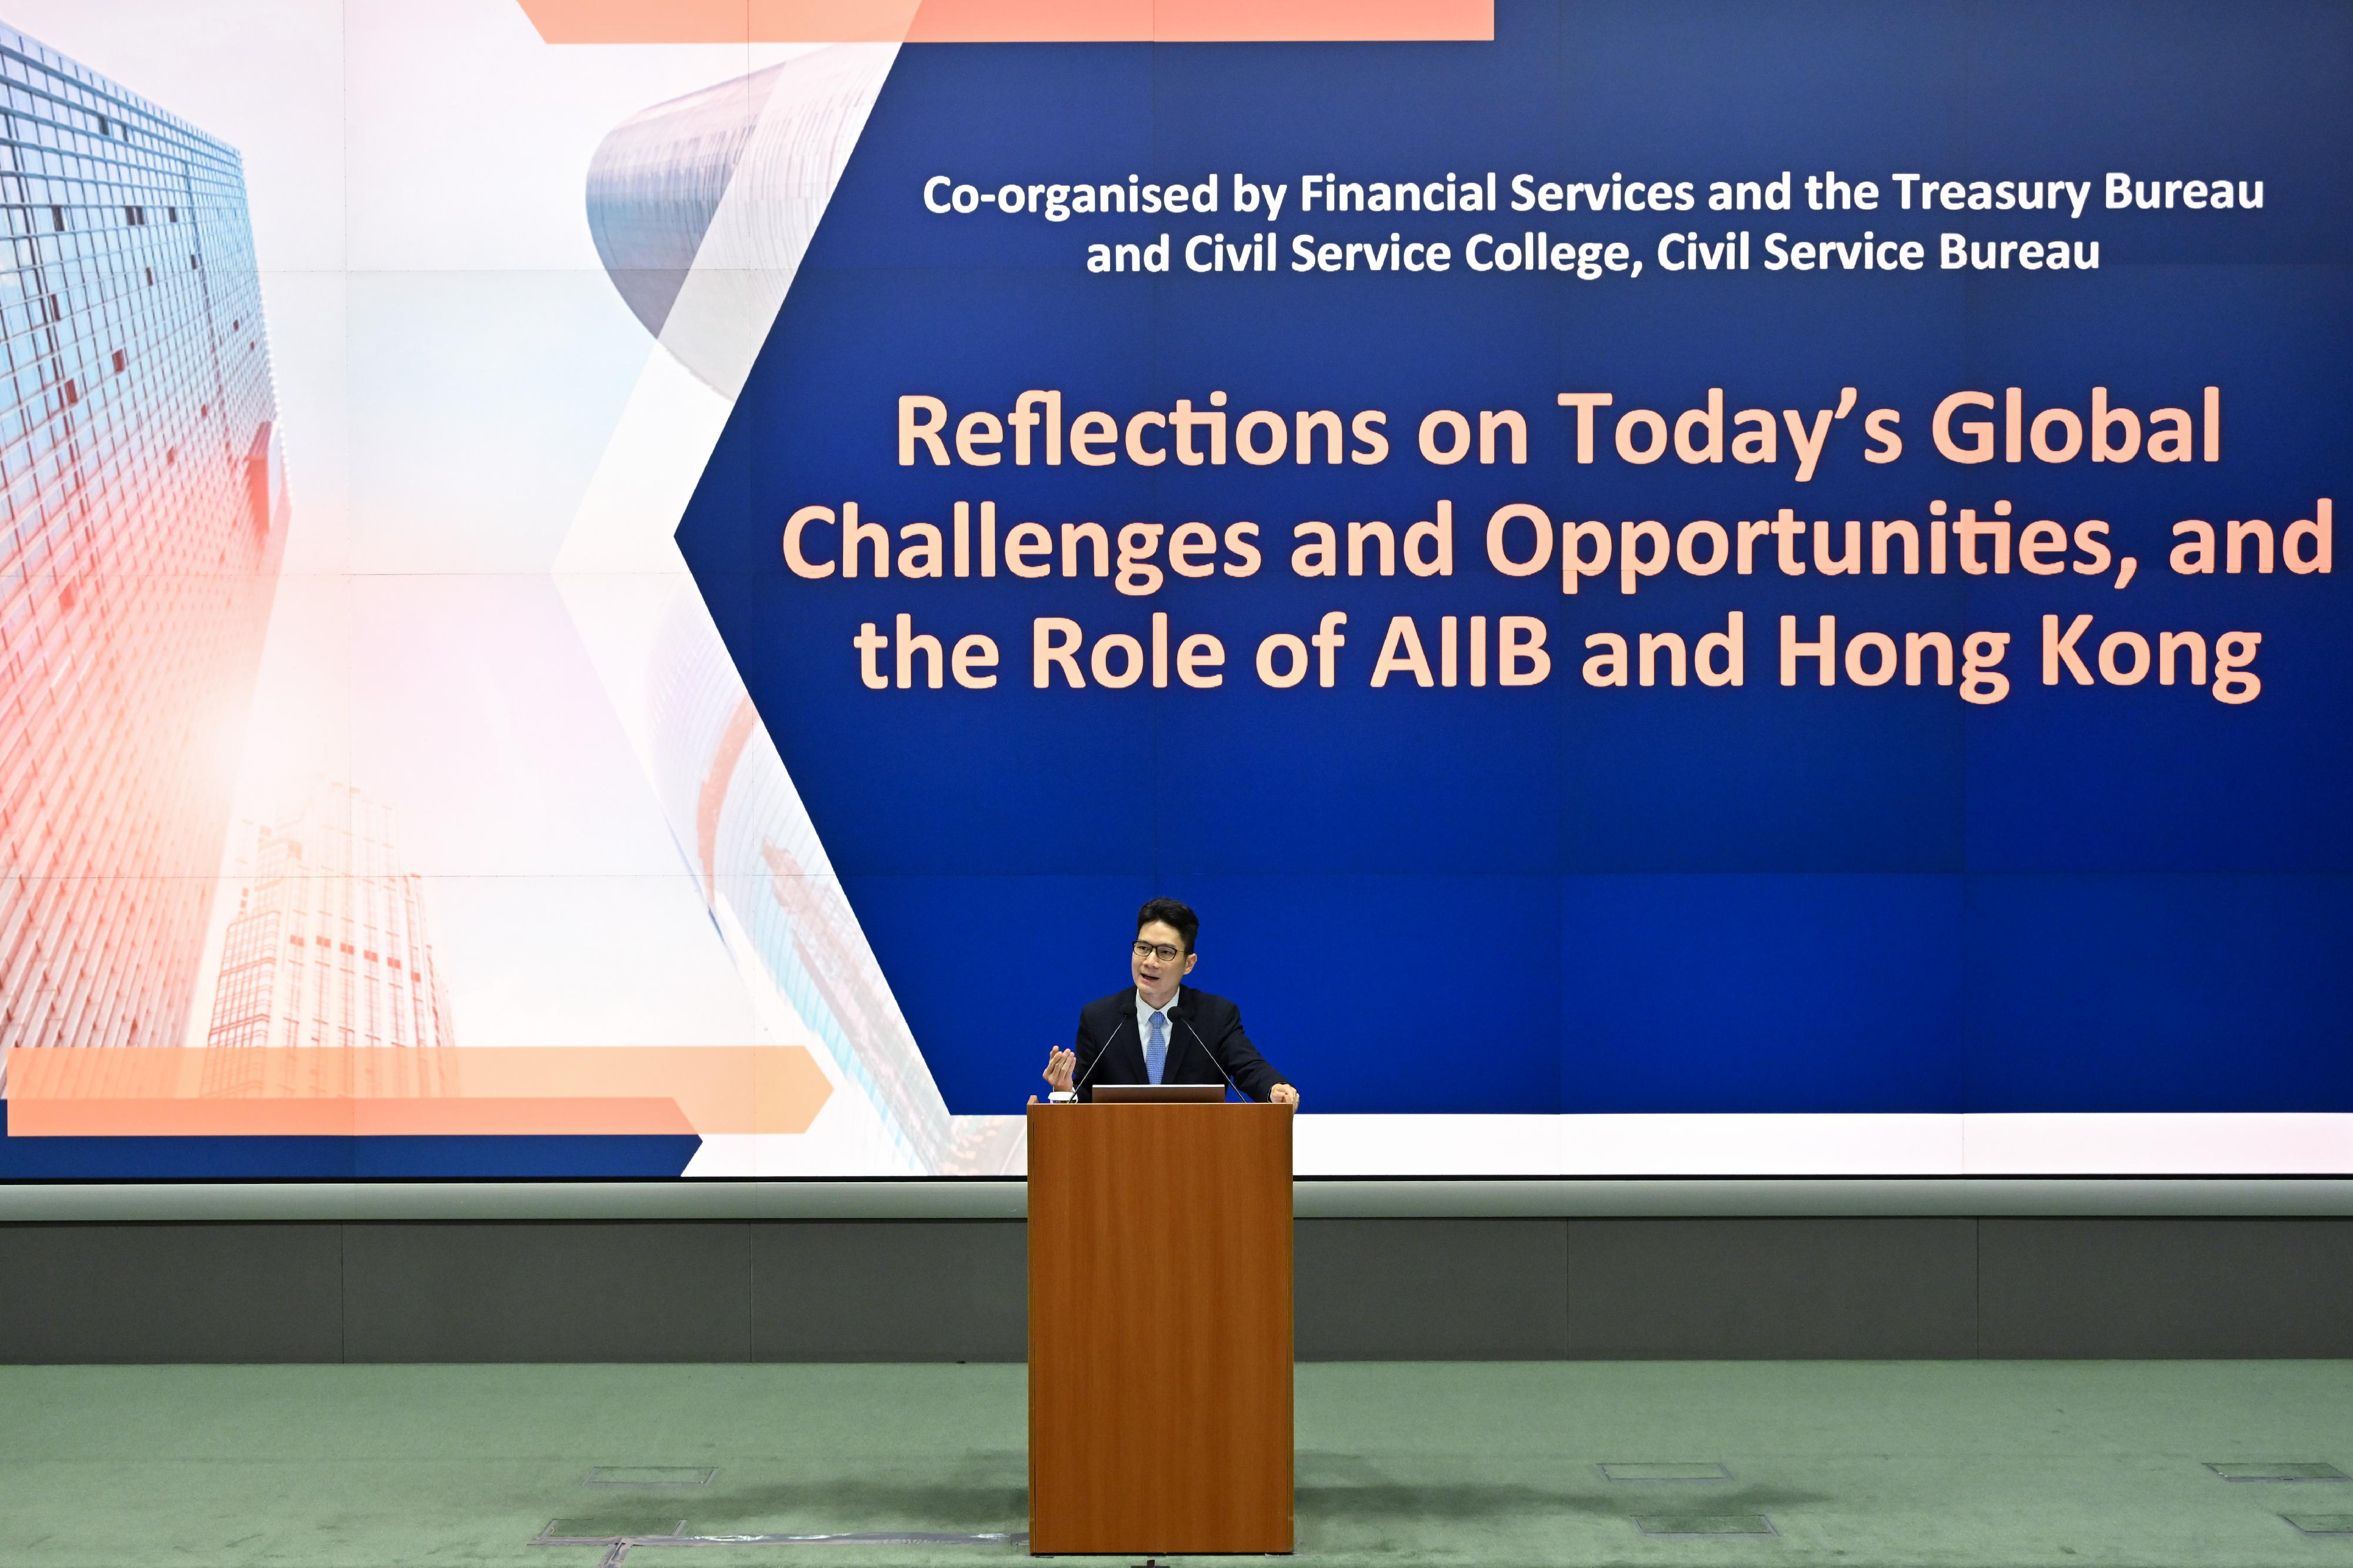 The President of the Asian Infrastructure Investment Bank (AIIB), Mr Jin Liqun, today (November 29) delivered a talk on "Reflections on Today's Global Challenges and Opportunities, and the Role of AIIB and Hong Kong" at the Central Government Offices. The talk was jointly organised by the Financial Services and the Treasury Bureau and the Civil Service College of the Civil Service Bureau. Photo shows the Acting Secretary for Financial Services and the Treasury, Mr Joseph Chan, speaking at the talk.